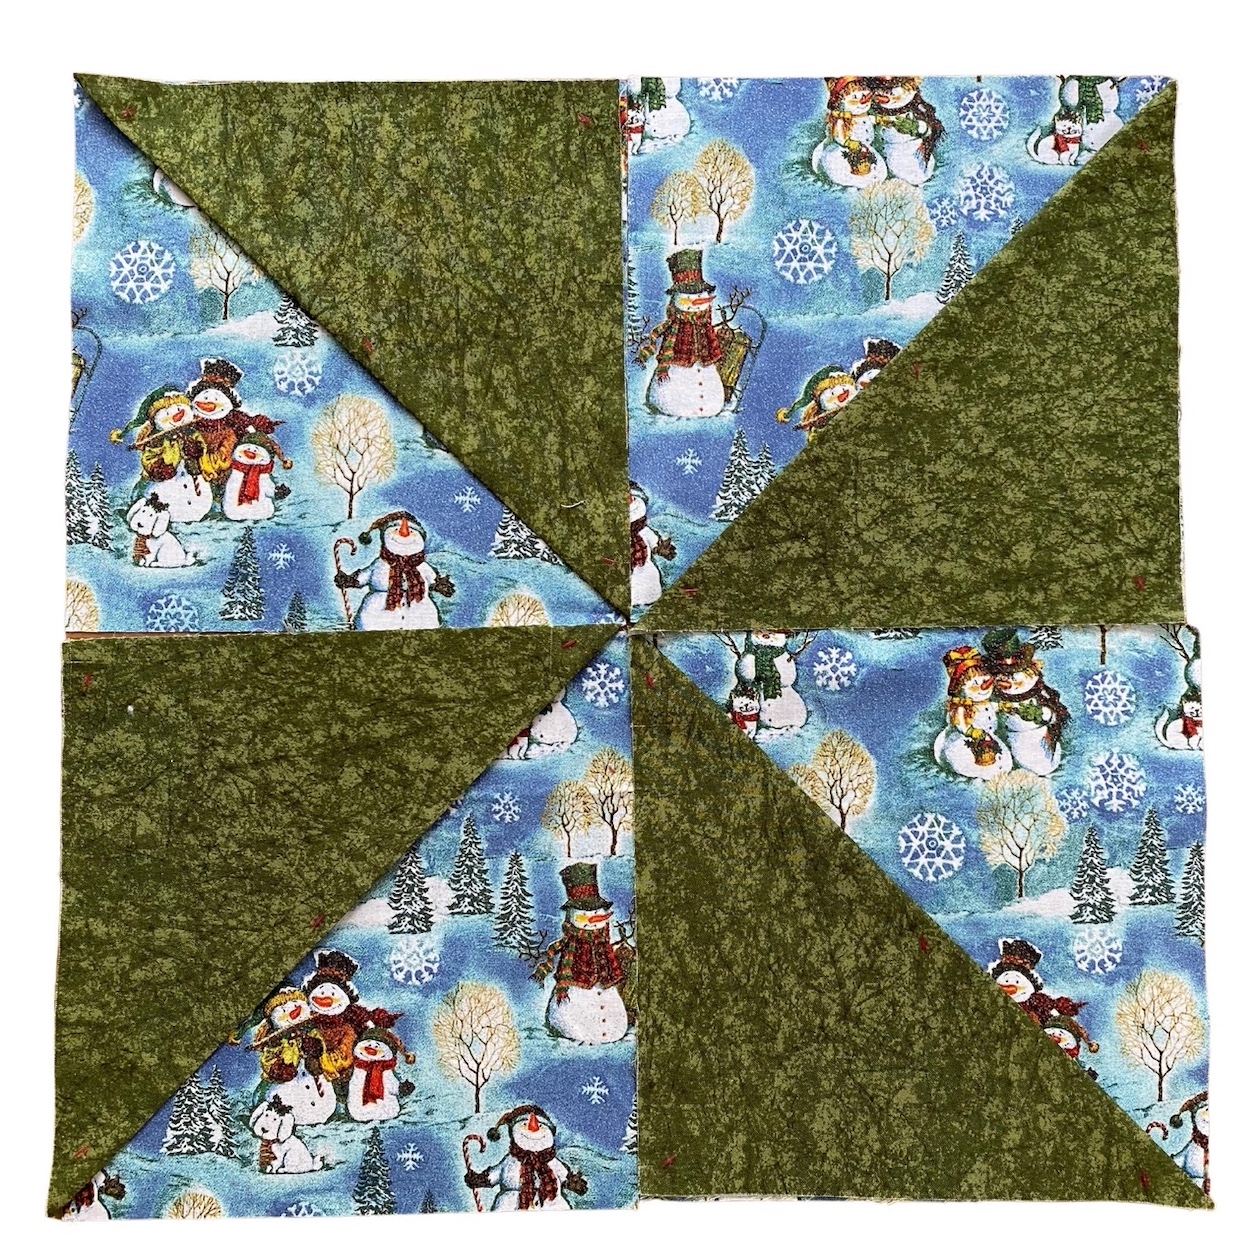 20 inch cotton snowman pinwheel table topper sewing project in light blue, green, white, red